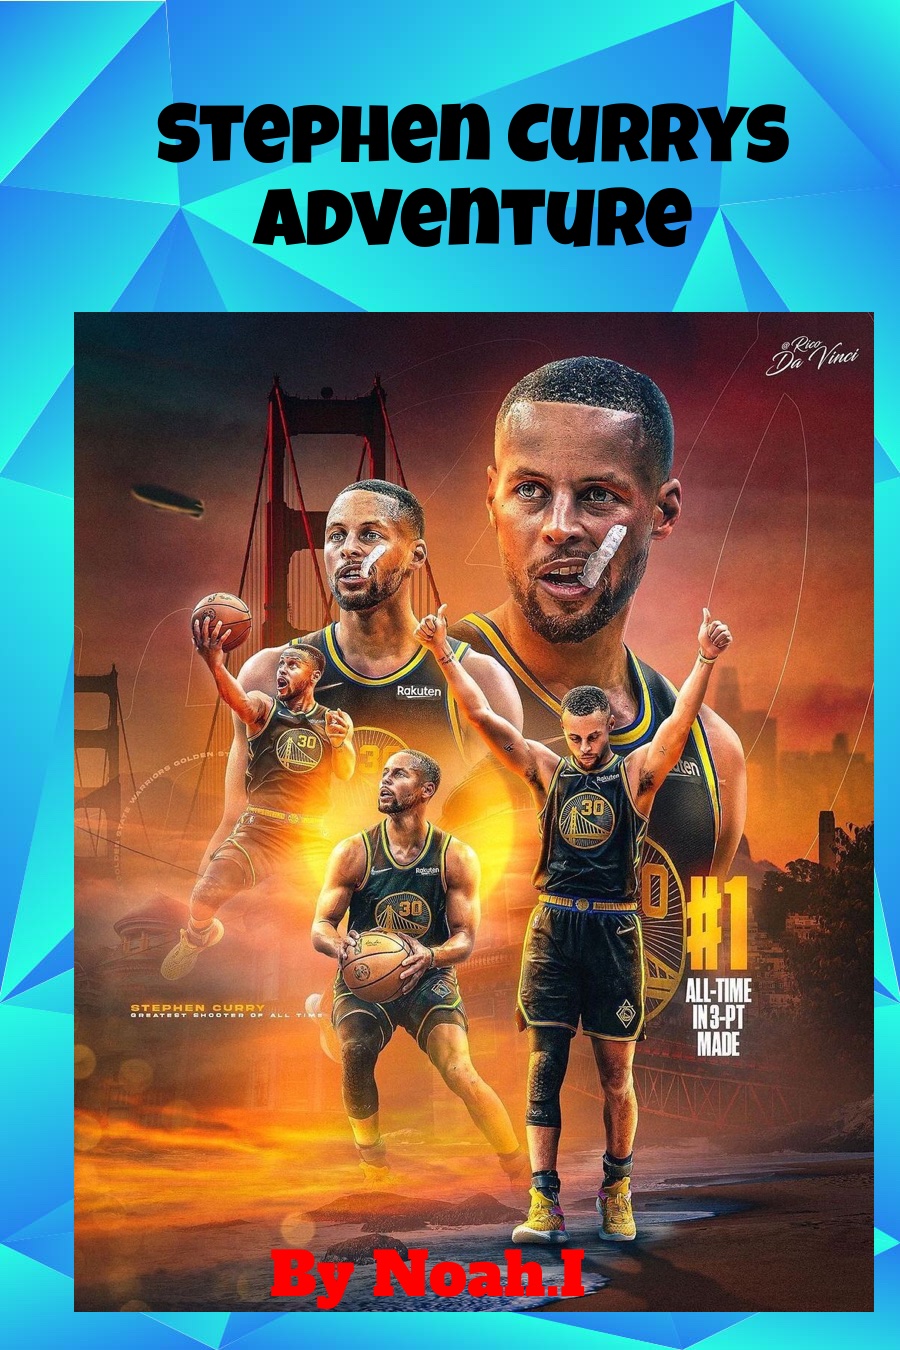 Stephen Curry’s Adventure by Noah I